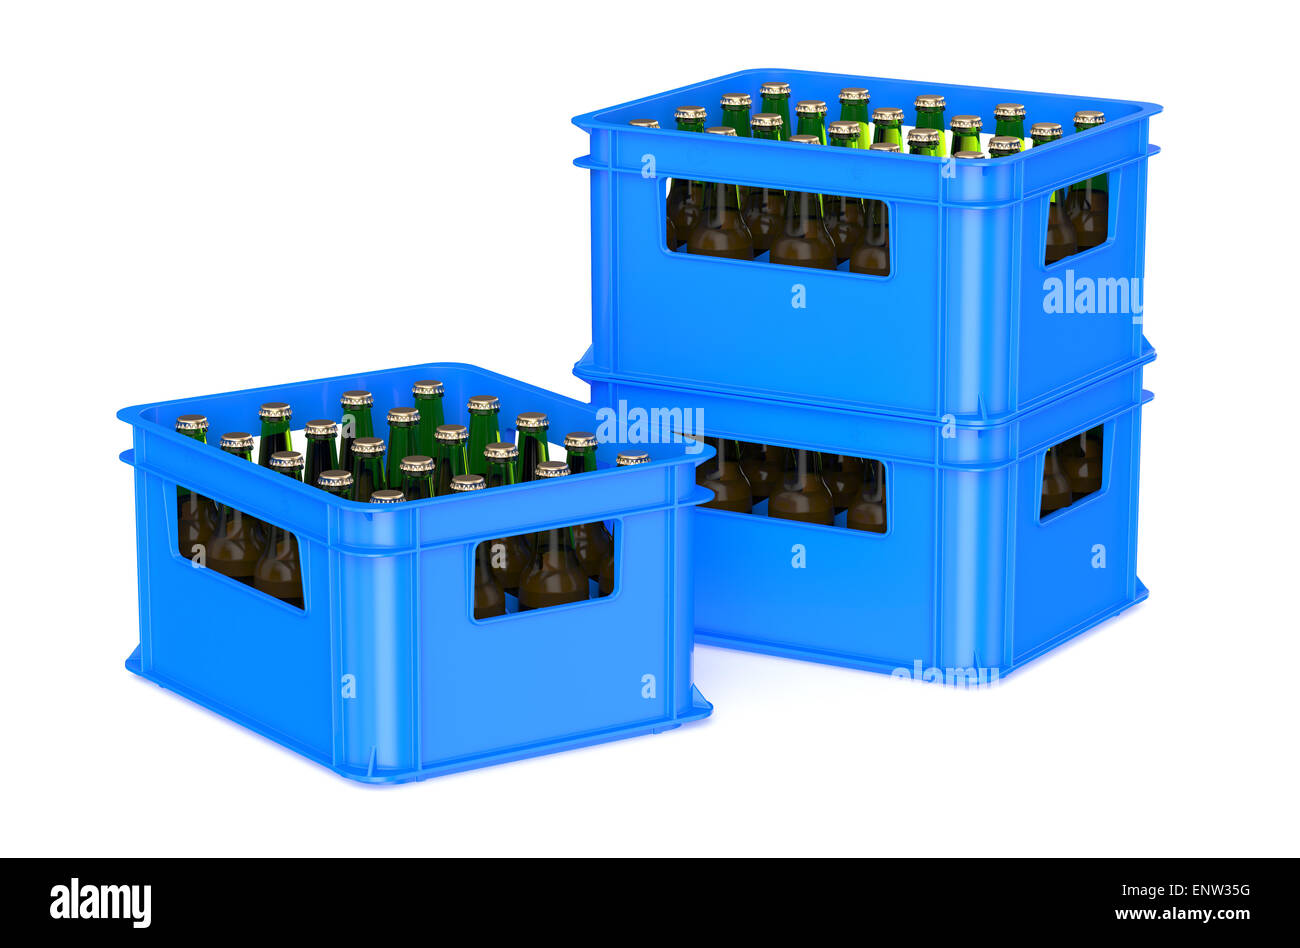 blue crate full with beer bottles isolated on white background Stock Photo